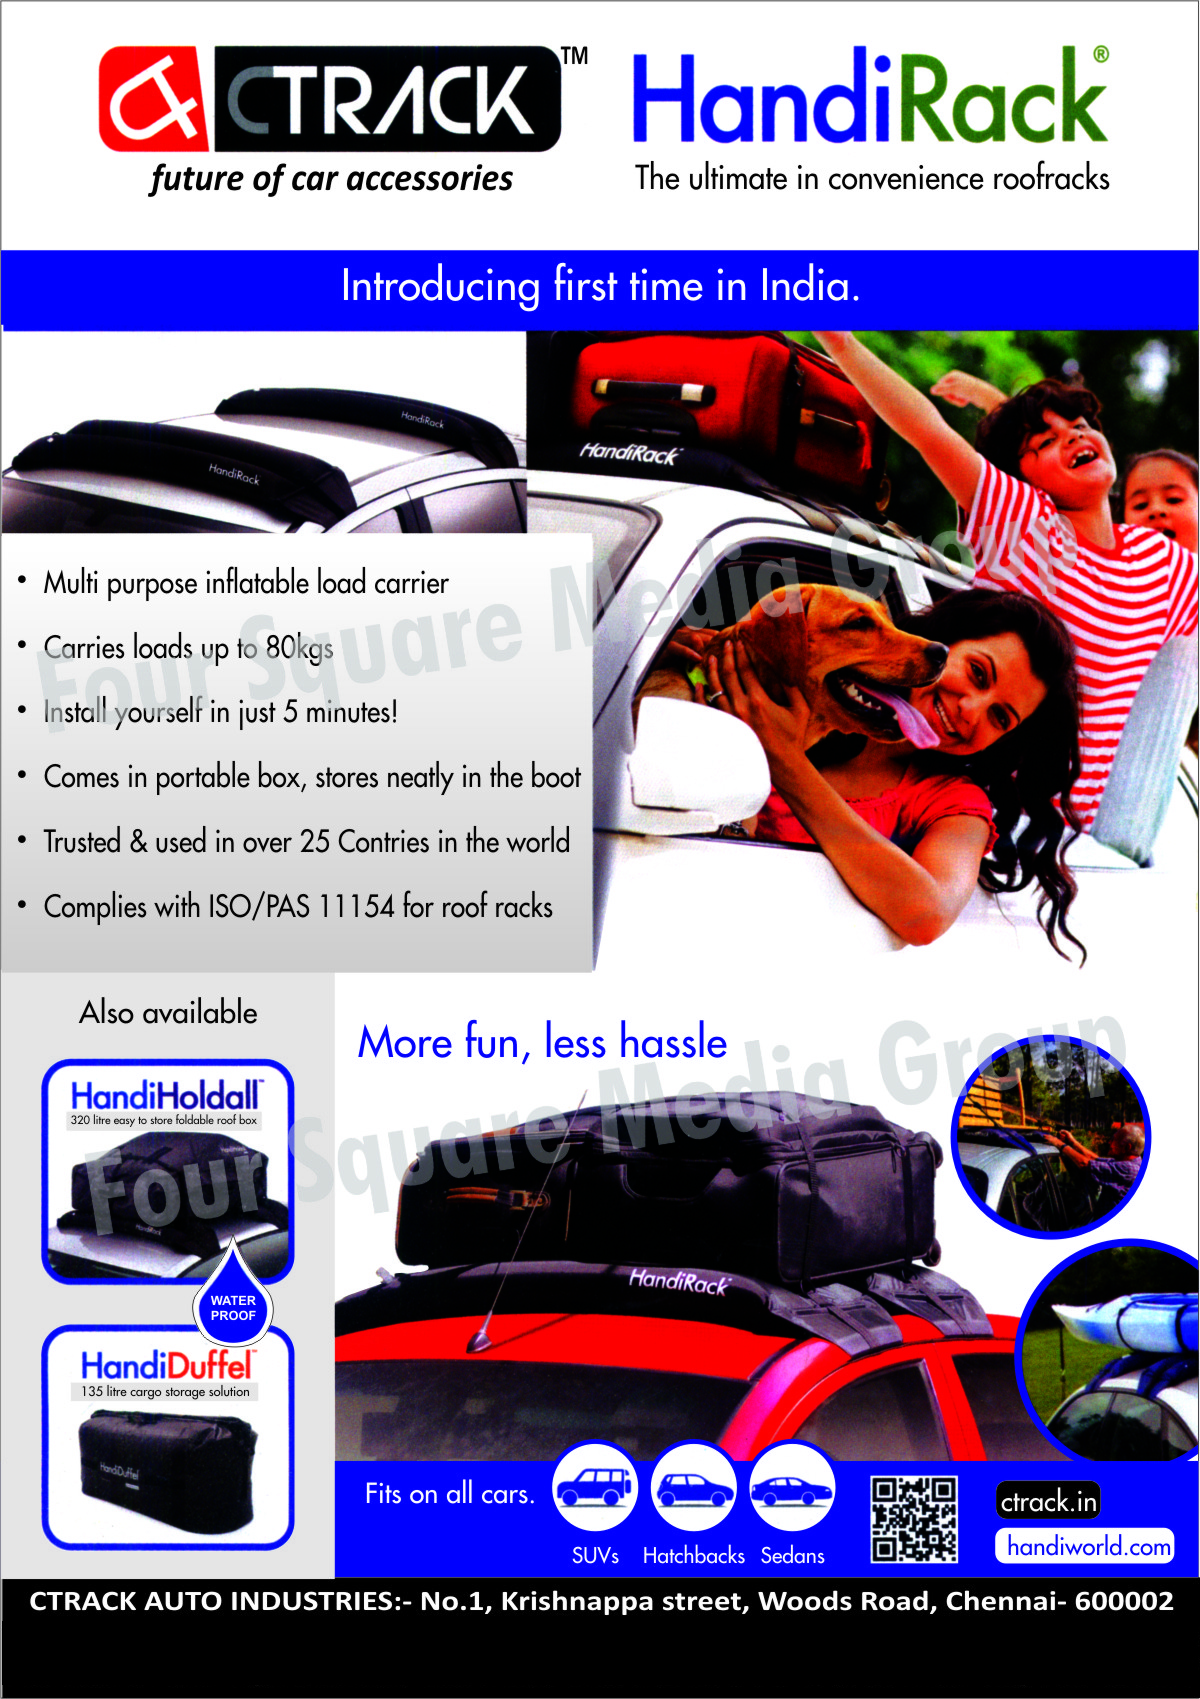 Car accessories, multi purpose inflatable load carrier